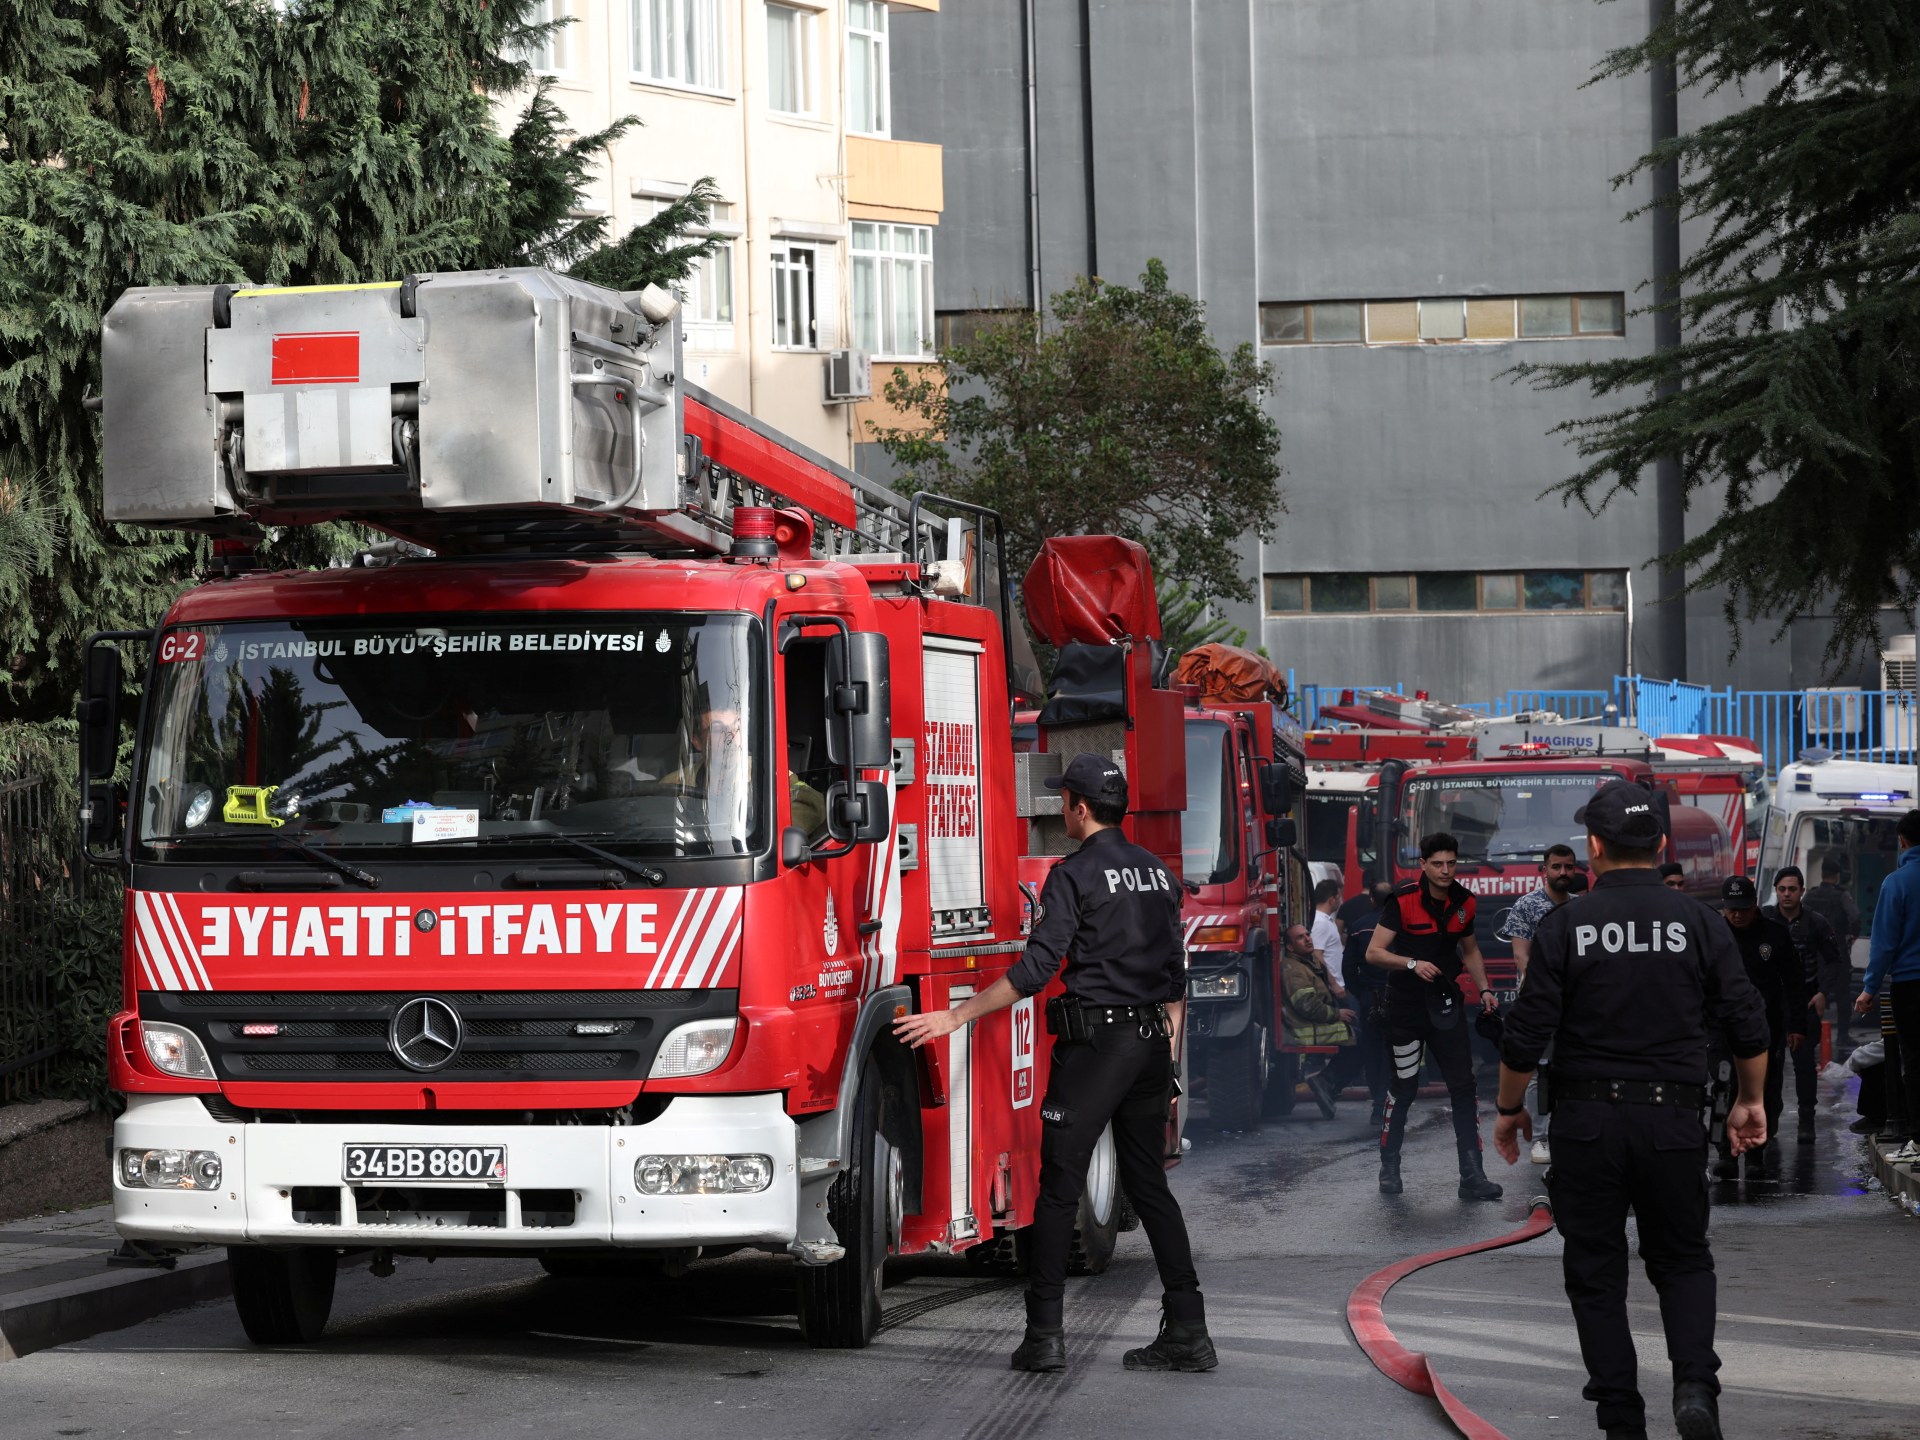 Fire at Istanbul nightclub kills 29 and injures several others